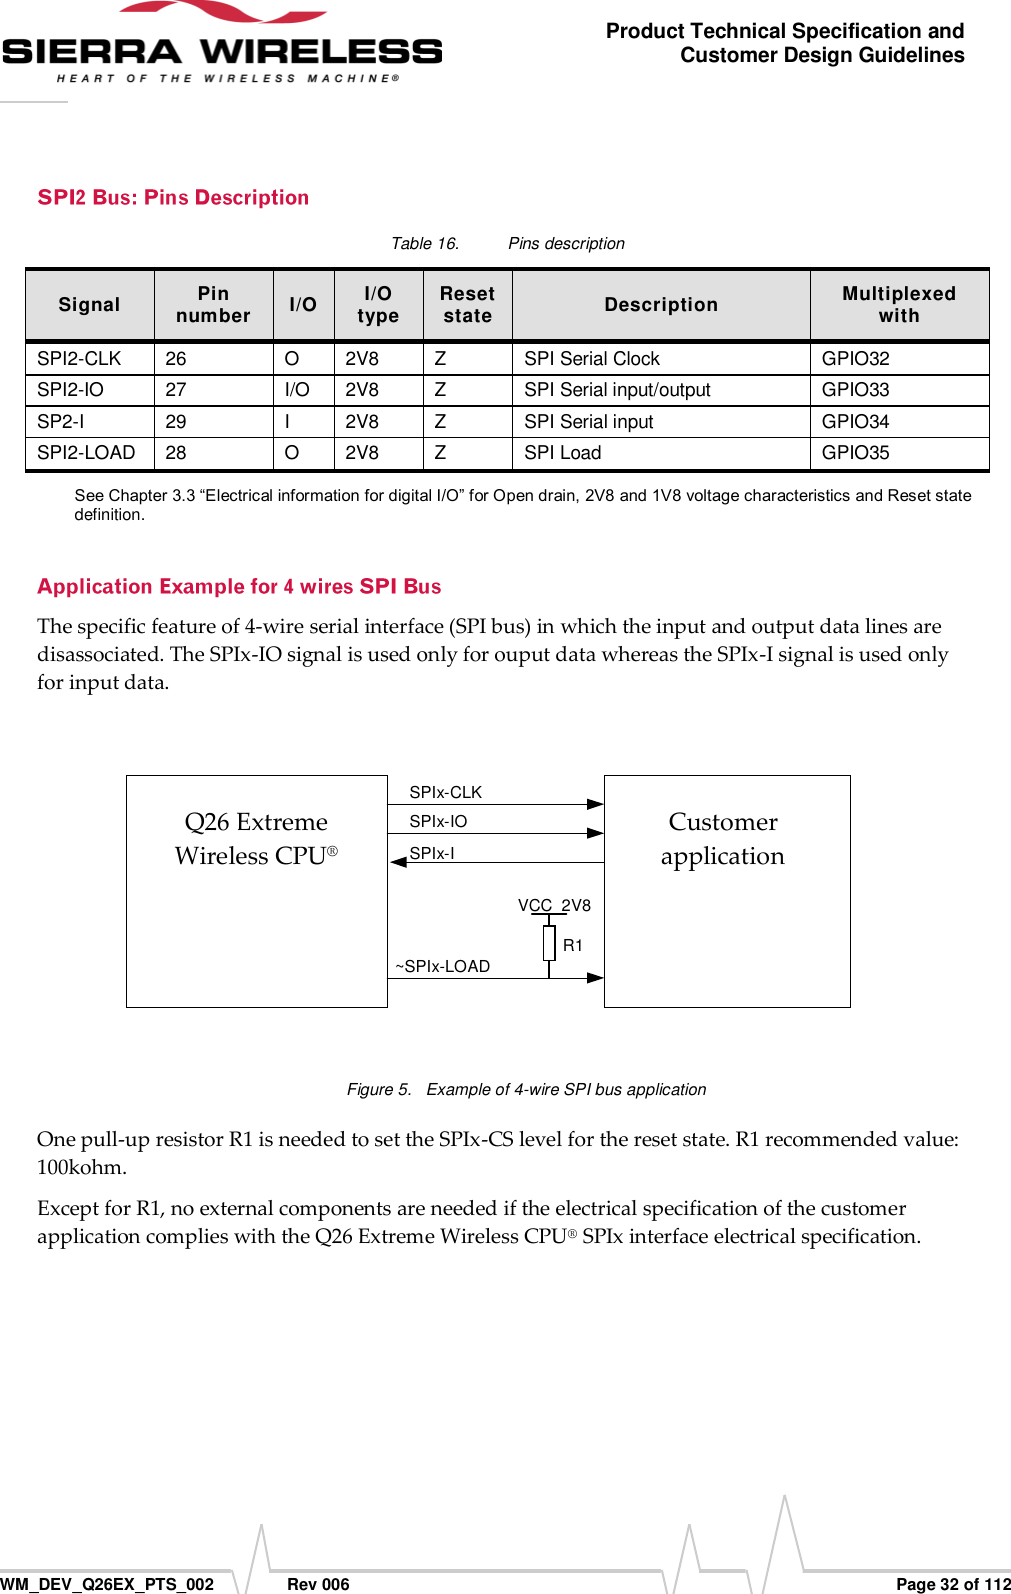      WM_DEV_Q26EX_PTS_002  Rev 006  Page 32 of 112 Product Technical Specification and Customer Design Guidelines Table 16.  Pins description Signal Pin number I/O I/O type Reset state Description Multiplexed with SPI2-CLK  26 O 2V8 Z SPI Serial Clock GPIO32 SPI2-IO 27 I/O 2V8 Z SPI Serial input/output GPIO33 SP2-I 29 I 2V8 Z SPI Serial input GPIO34 SPI2-LOAD 28 O 2V8 Z SPI Load GPIO35 See Chapter 3.3 “Electrical information for digital I/O” for Open drain, 2V8 and 1V8 voltage characteristics and Reset state definition. The specific feature of 4-wire serial interface (SPI bus) in which the input and output data lines are disassociated. The SPIx-IO signal is used only for ouput data whereas the SPIx-I signal is used only for input data.   Figure 5.  Example of 4-wire SPI bus application One pull-up resistor R1 is needed to set the SPIx-CS level for the reset state. R1 recommended value: 100kohm. Except for R1, no external components are needed if the electrical specification of the customer application complies with the Q26 Extreme Wireless CPU® SPIx interface electrical specification.  Customer application Q26 Extreme Wireless CPU® SPIx-IO SPIx-CLK ~SPIx-LOAD VCC_2V8 R1 SPIx-I 